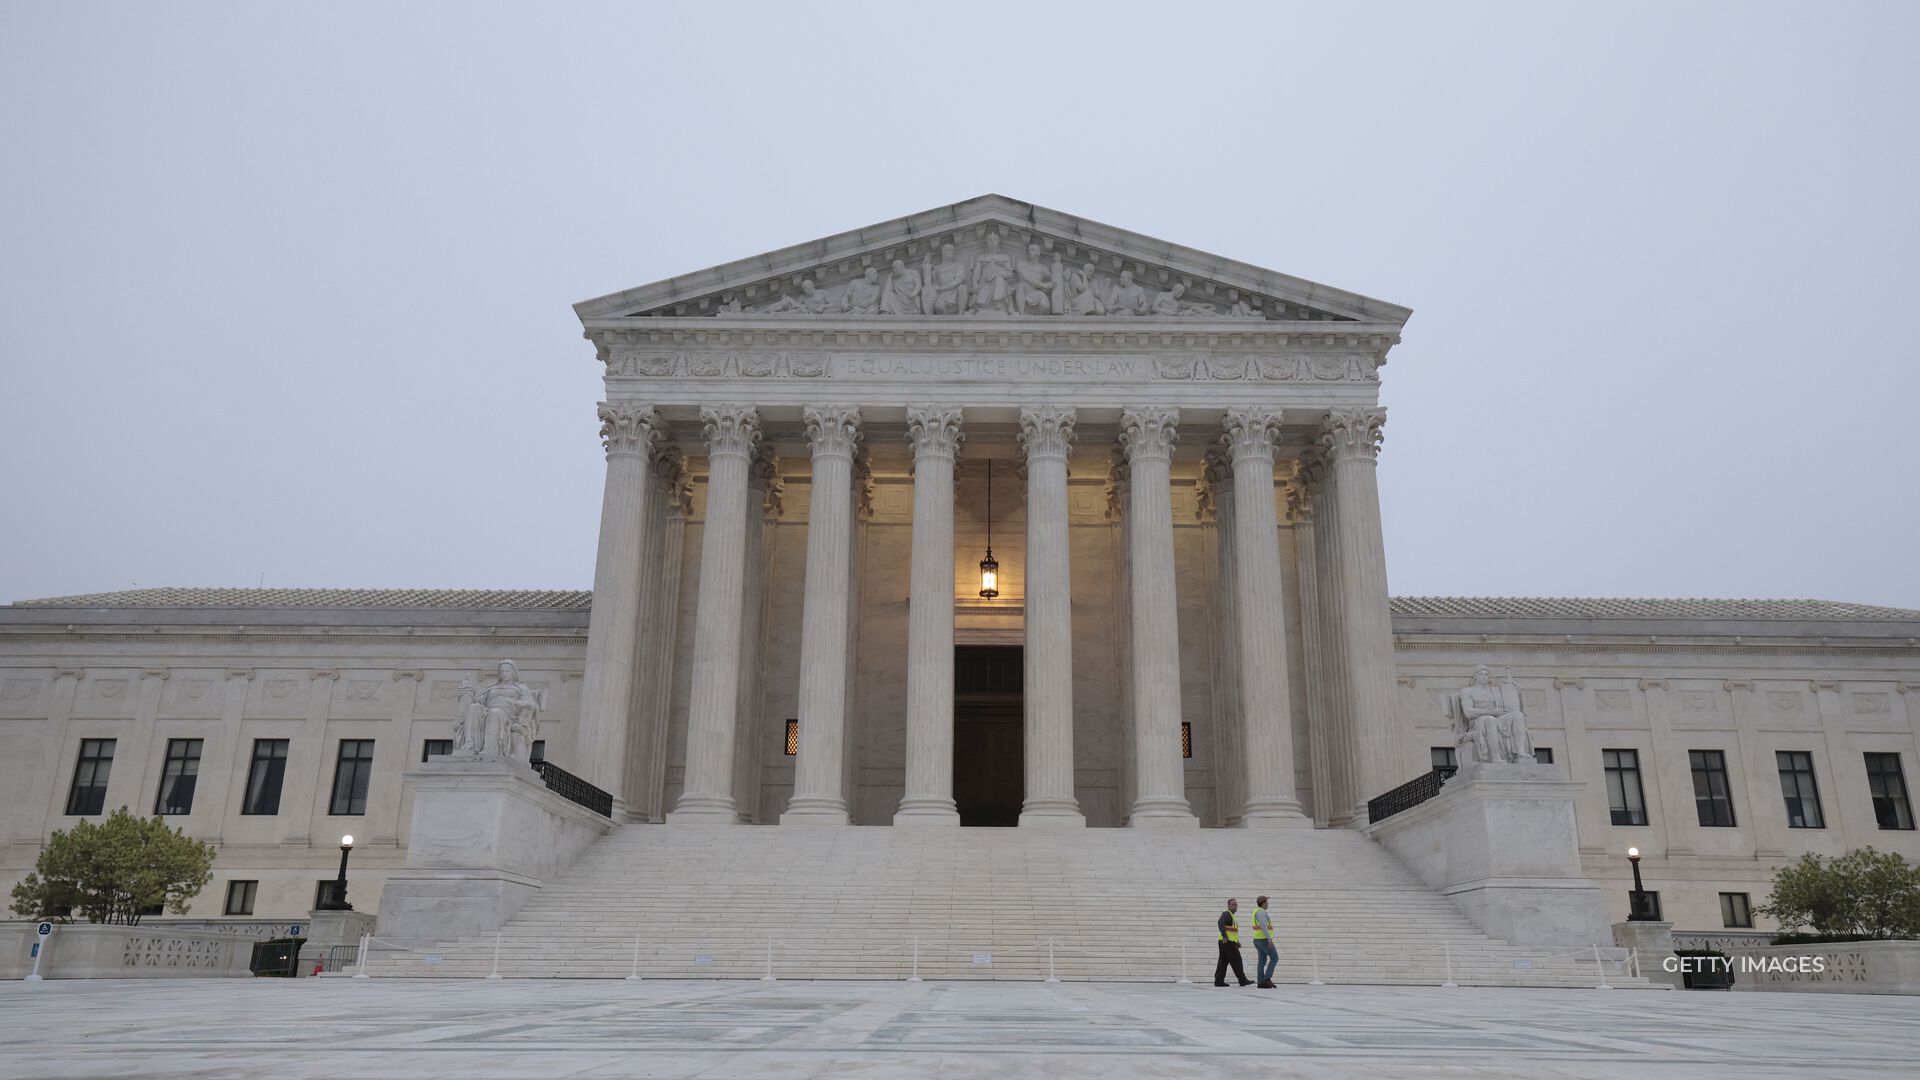 Can the government foreclose on a property, sell it to collect unpaid taxes, and keep a surplus profit? The Supreme Court will answer that question.